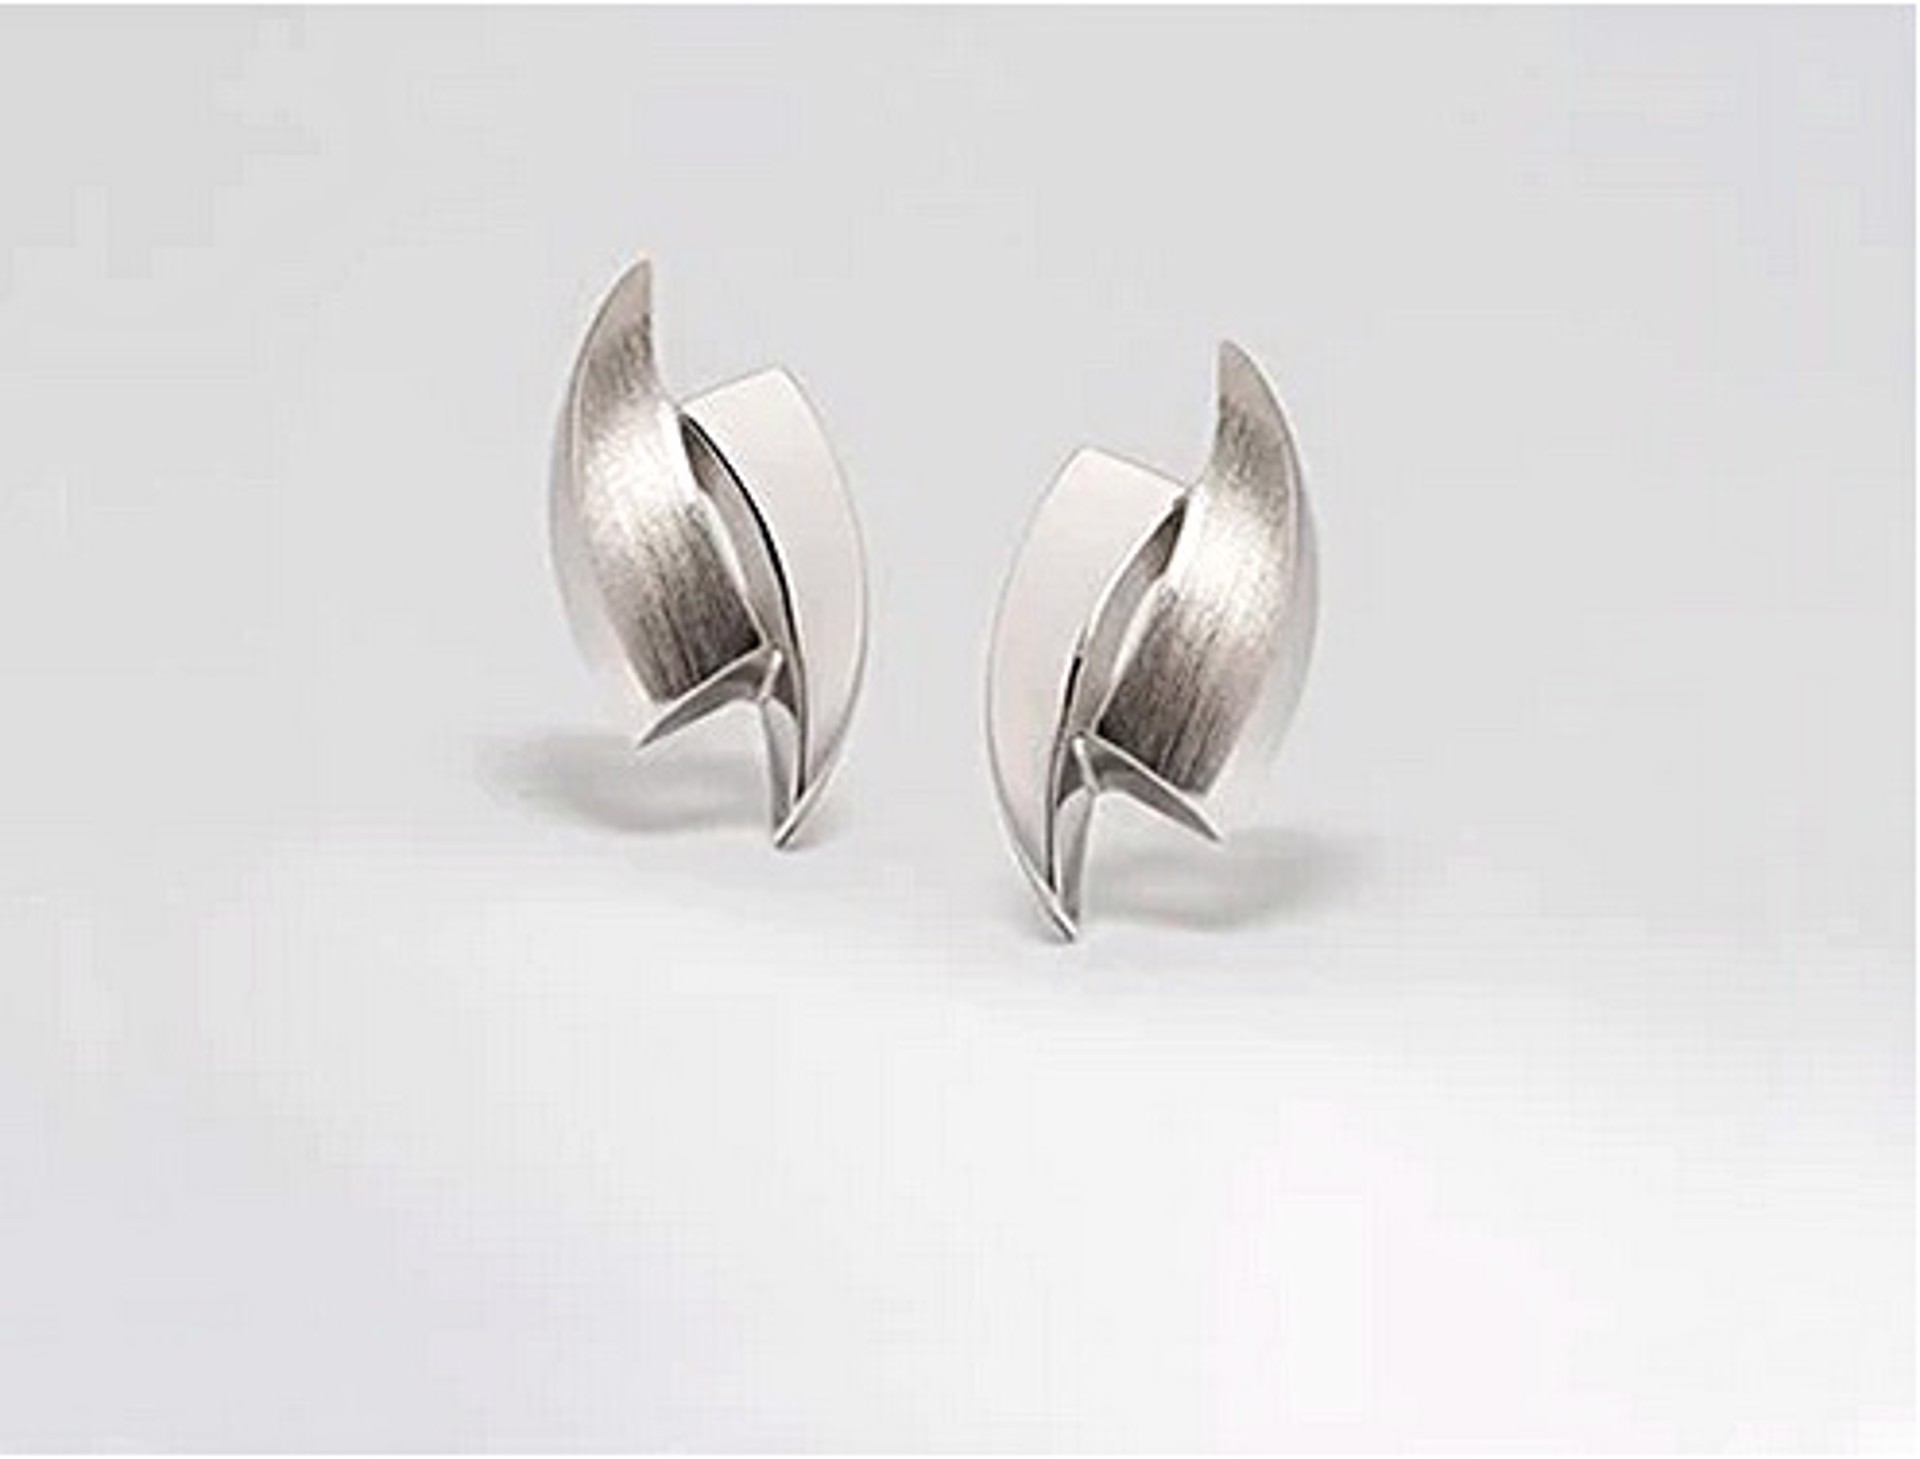 Earrings - Sterling Silver Contemporary by Joryel Vera